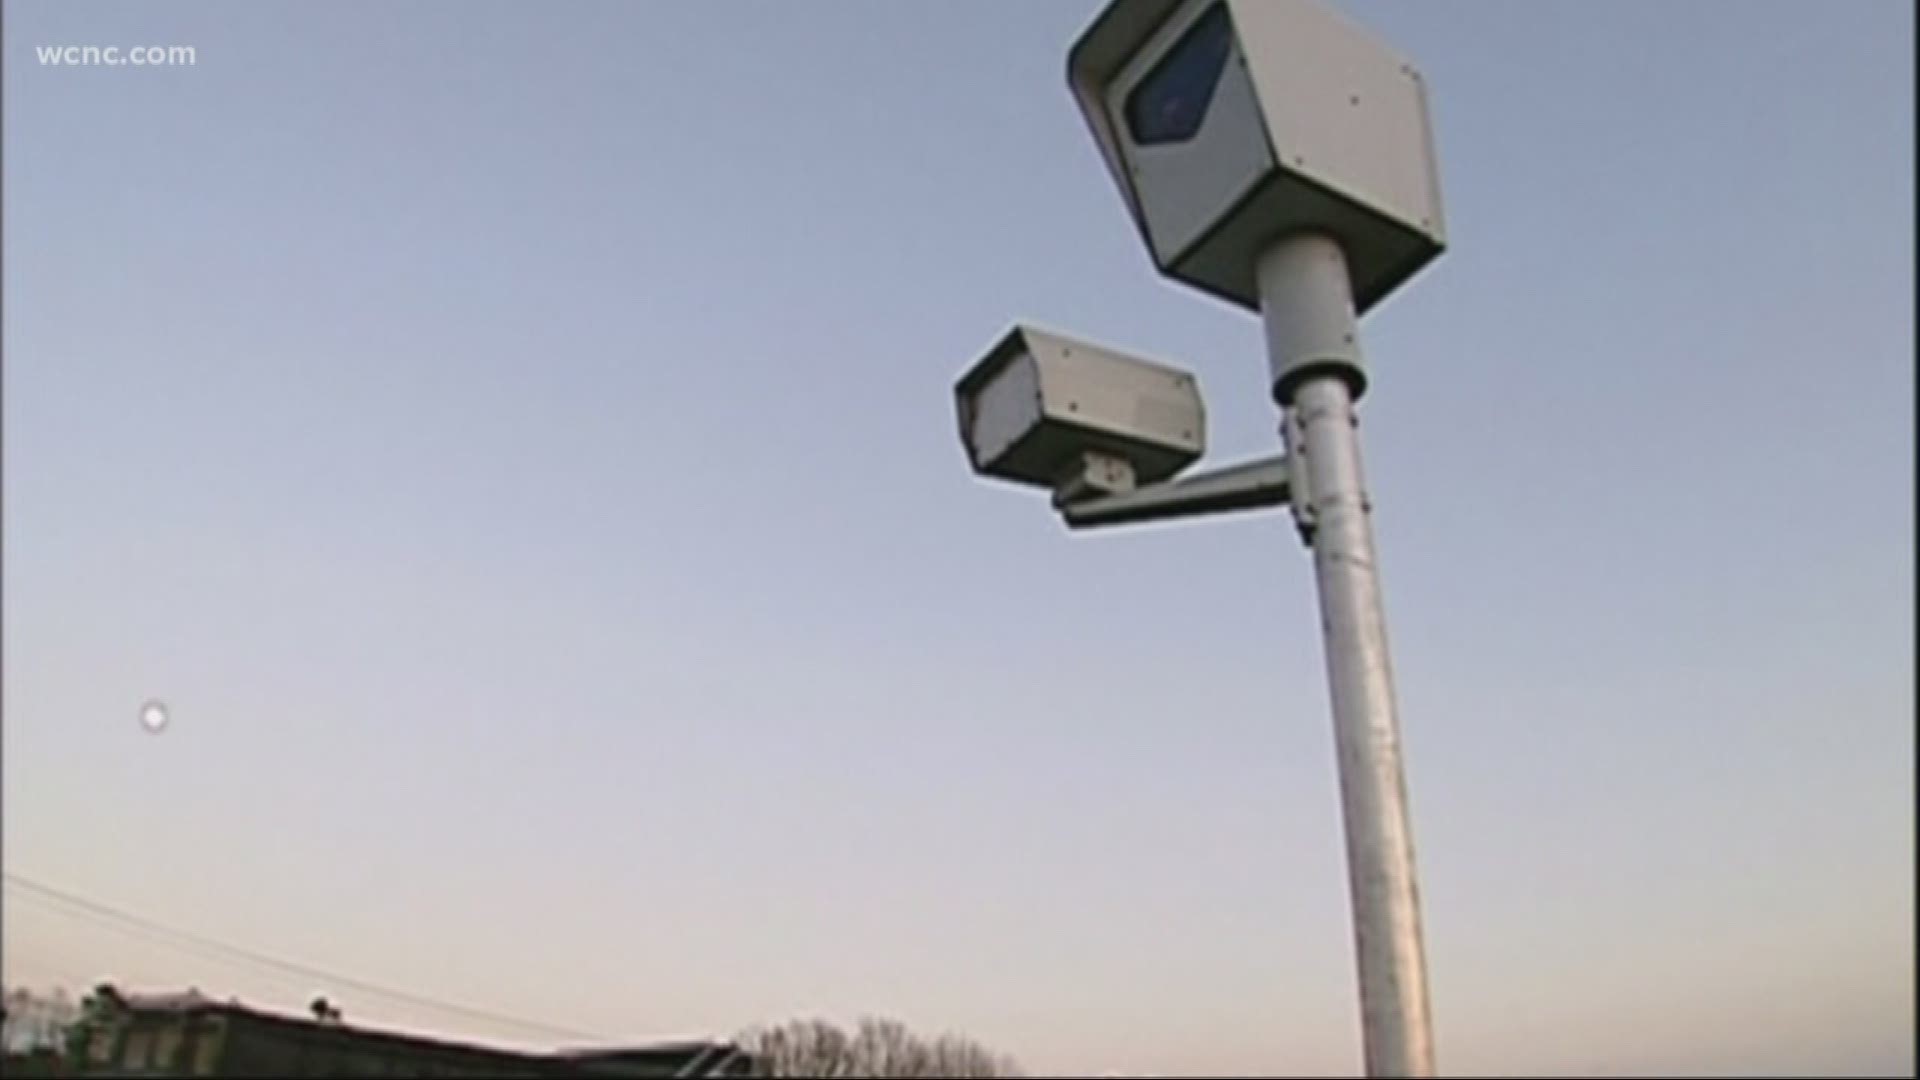 Could red light cameras return to Charlotte?